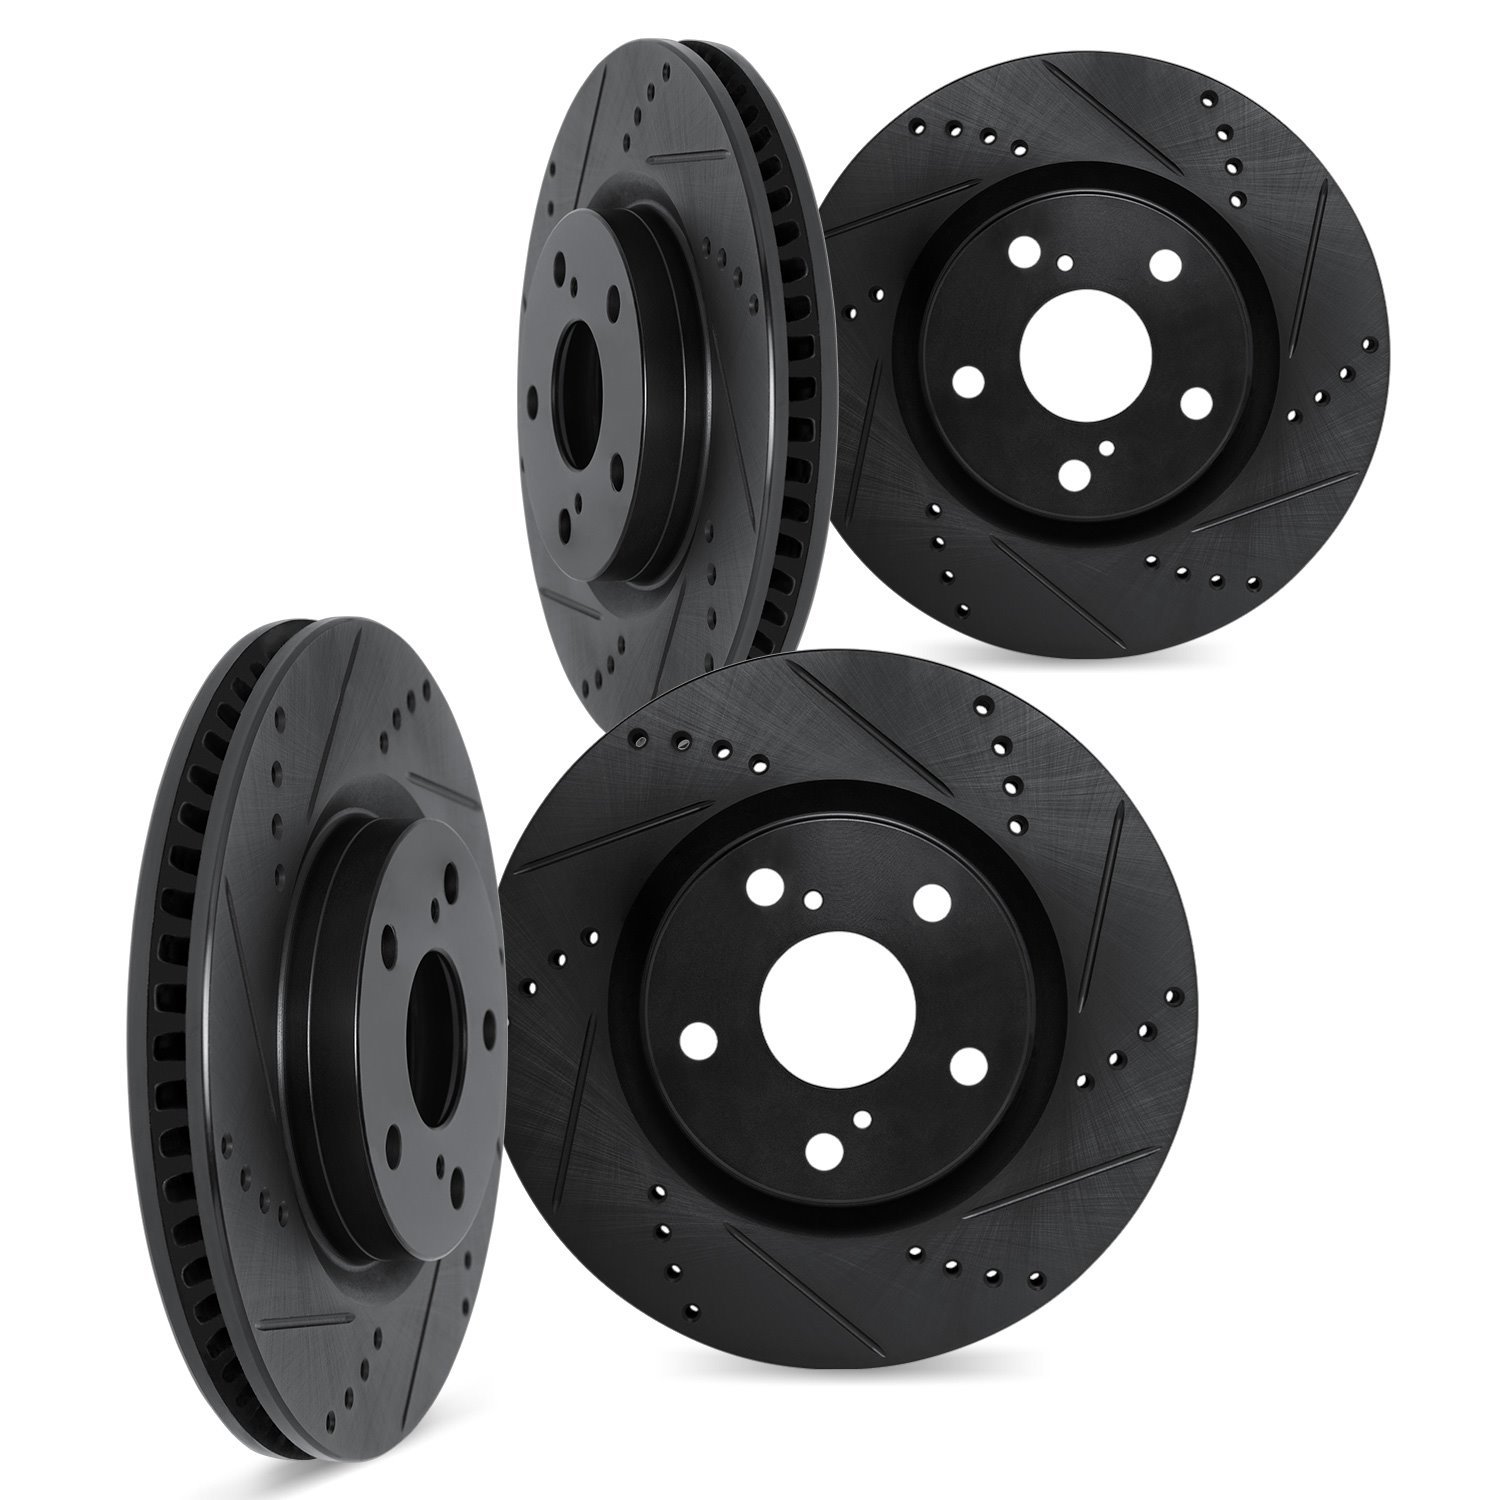 8004-67044 Drilled/Slotted Brake Rotors [Black], 1989-1996 Infiniti/Nissan, Position: Front and Rear